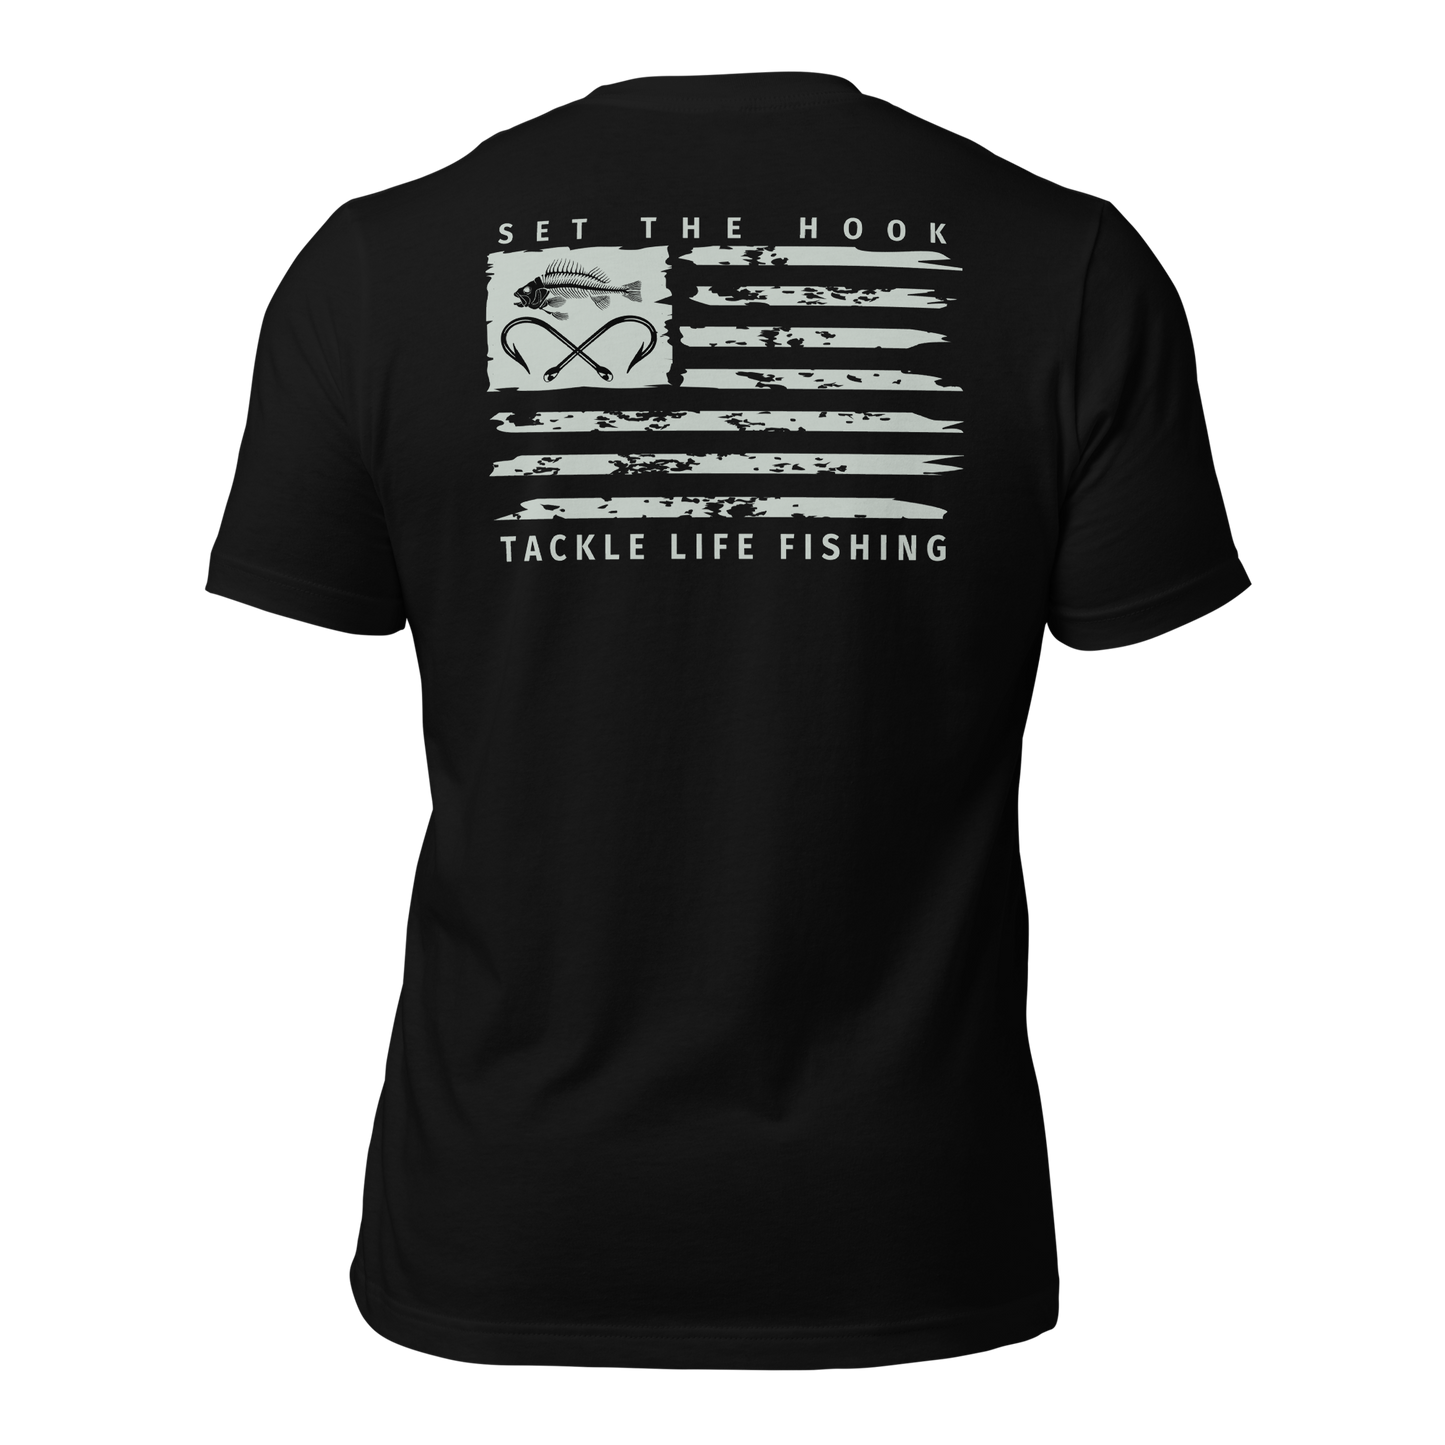 TLF Dirstressed Flag Pirate Logo Unisex T-Shirt -- Gray Chest Logo and Back Design on Black